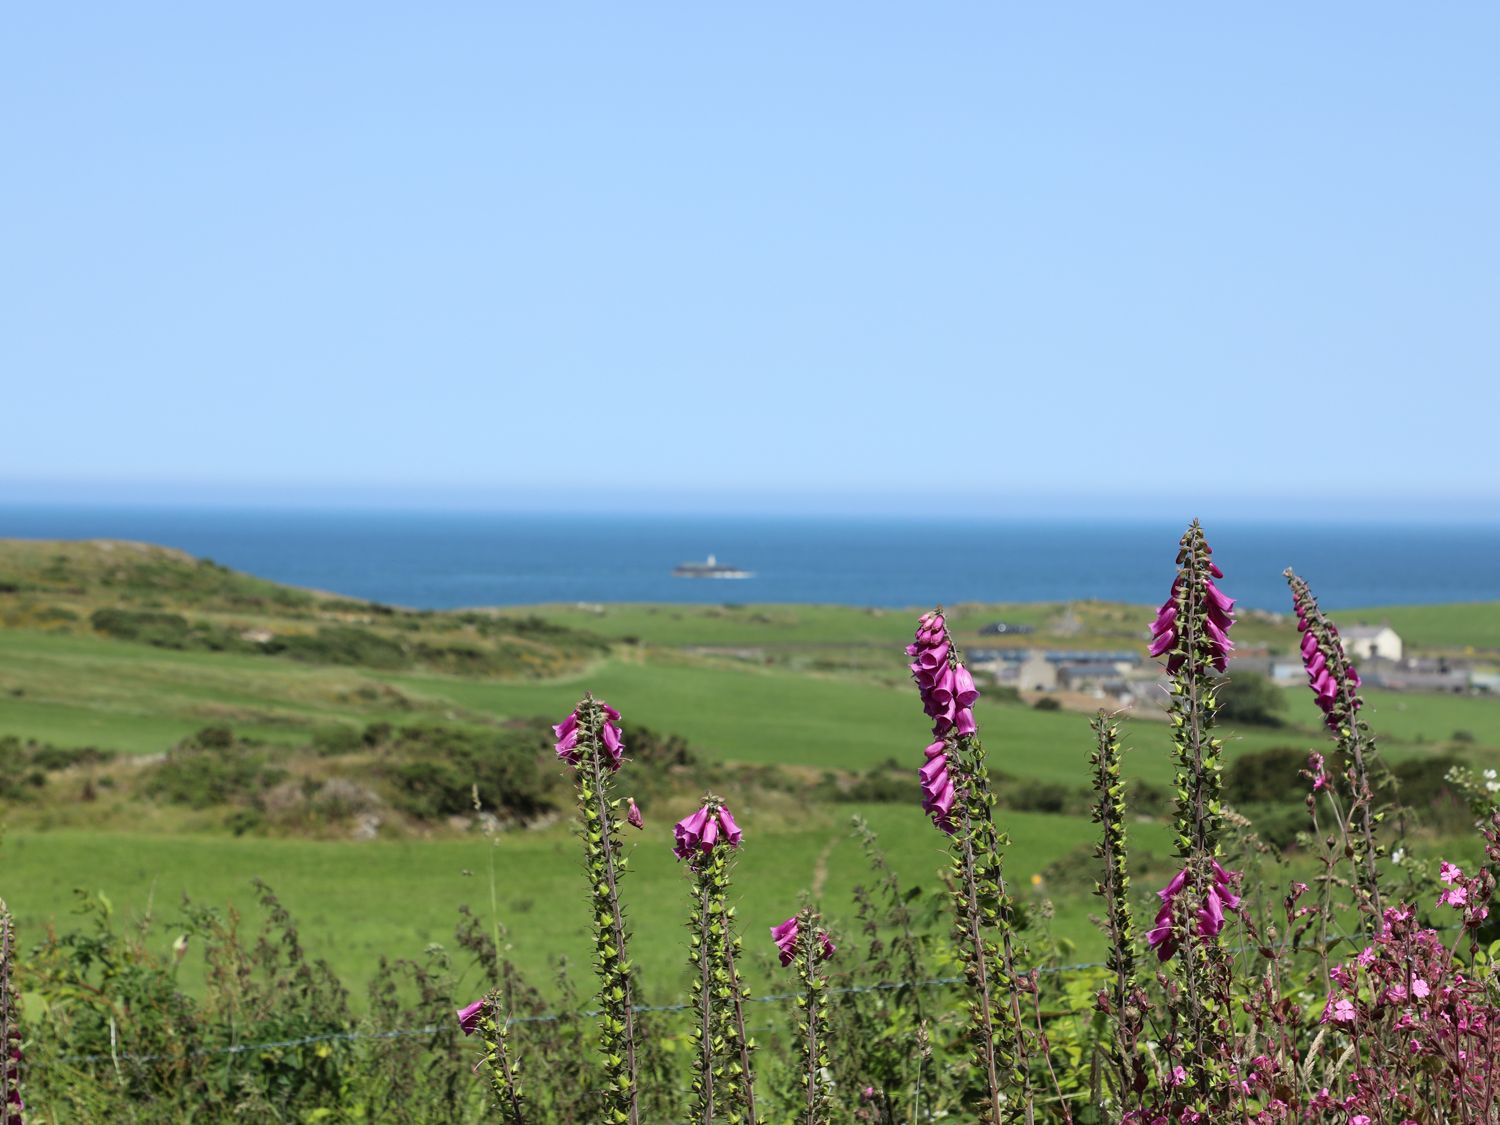 West Mouse View, Church Bay